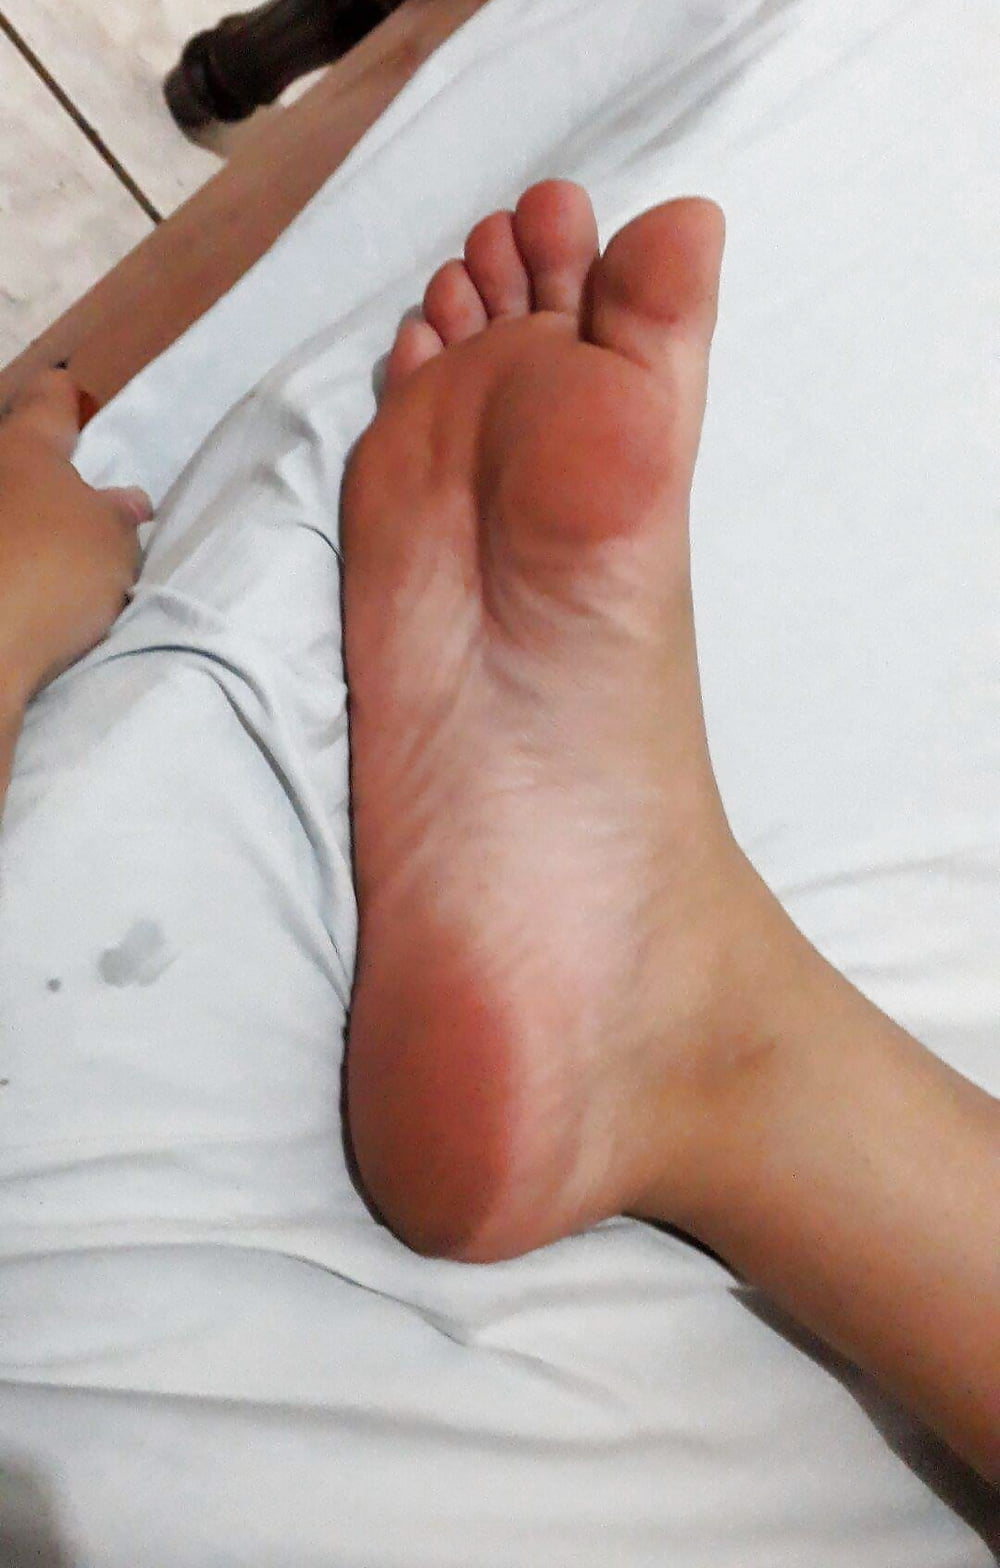 13 years old girl and her sexy feet (3/22)